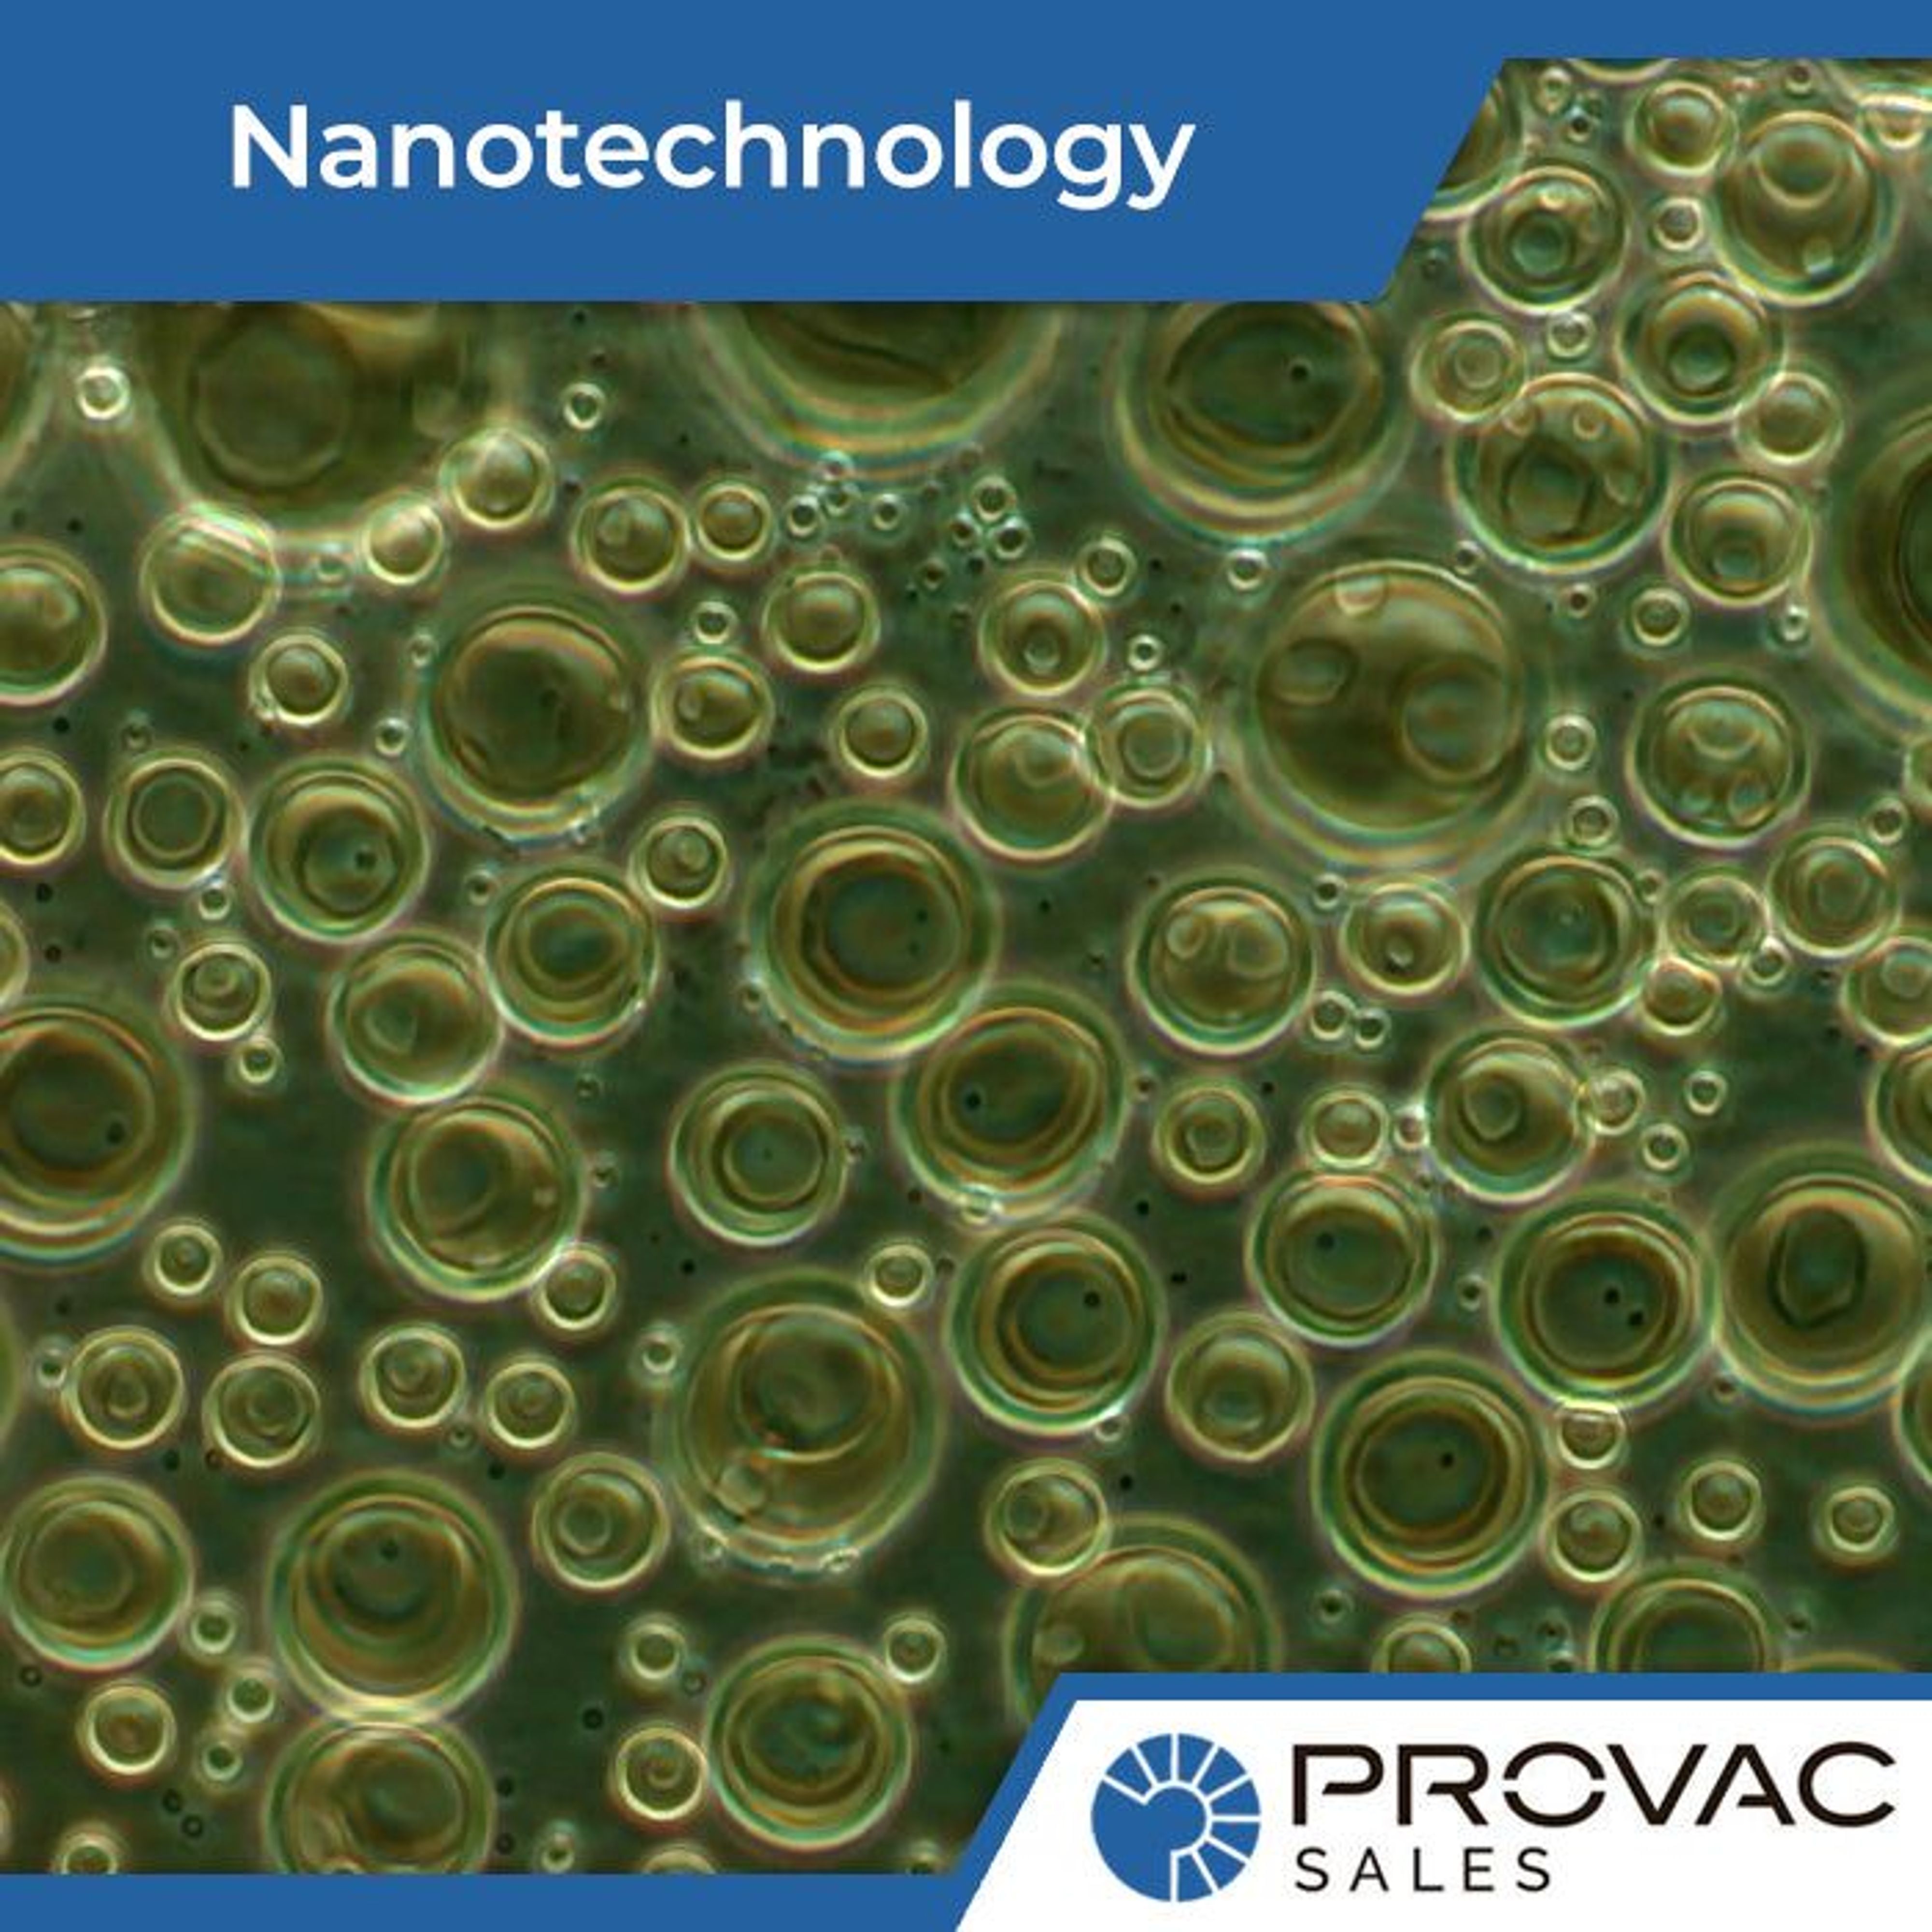 How Do Vacuum Pumps with Nanotechnology Work? Background